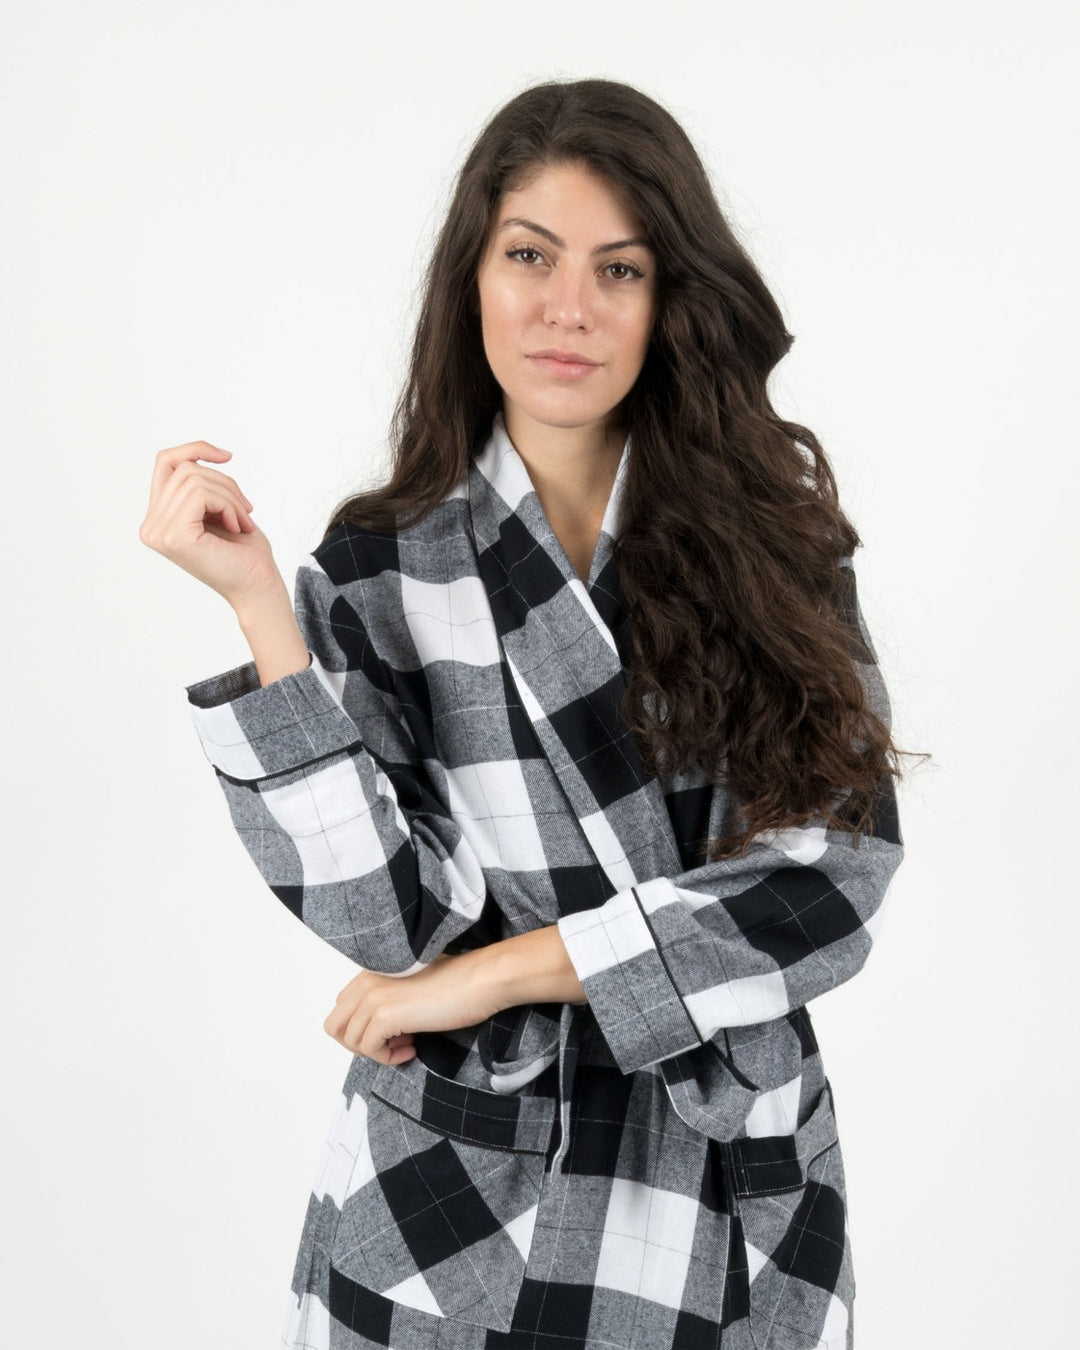 black and white plaid women's flannel robe